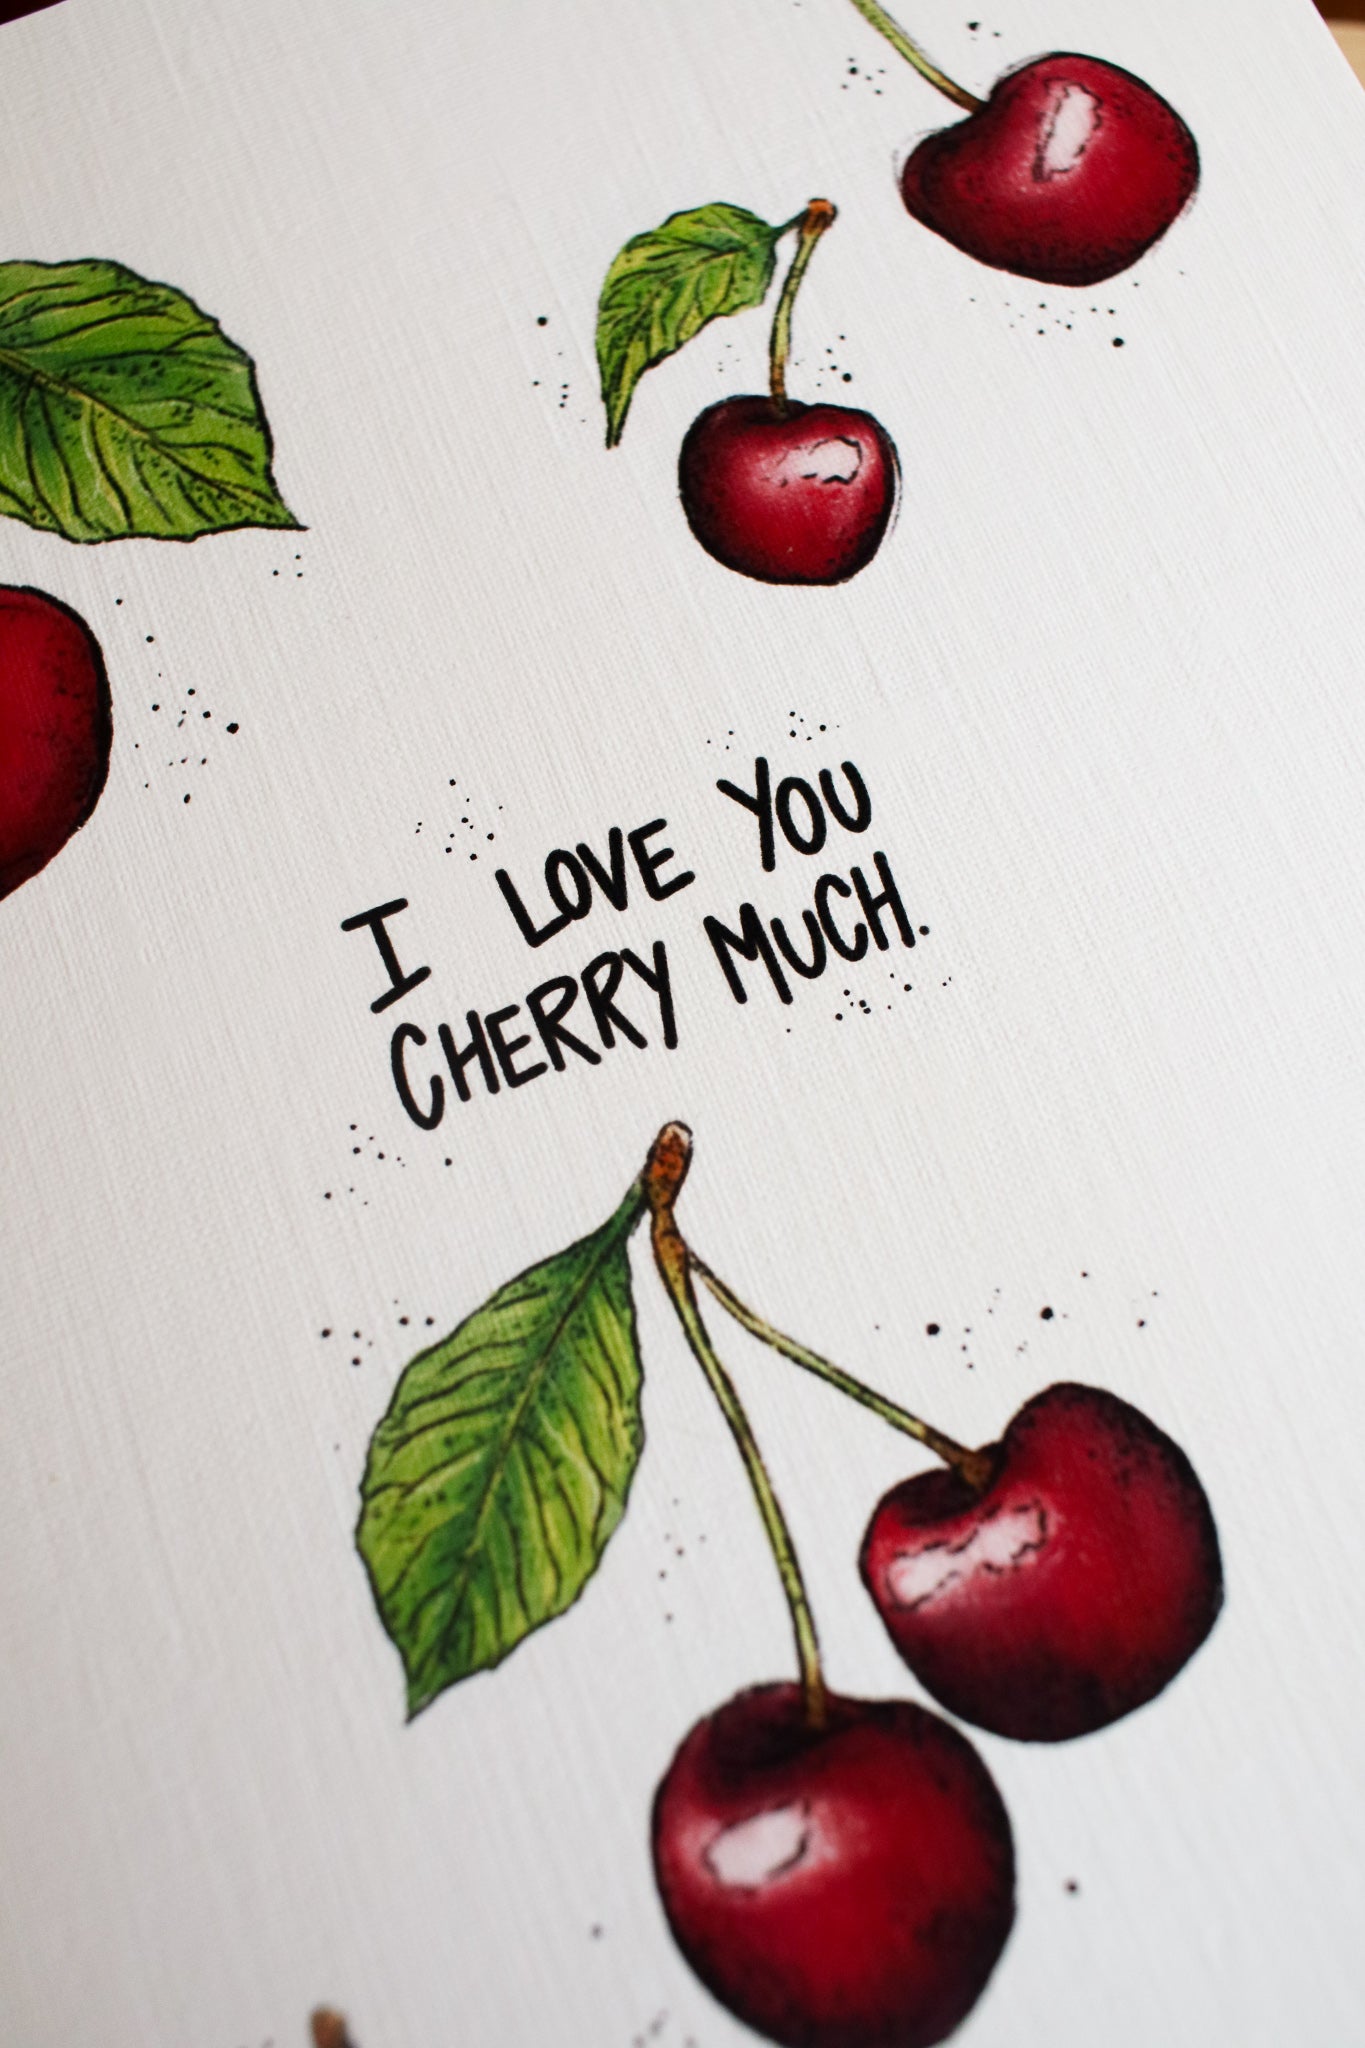 I Love You Cherry Much! - Greeting Card